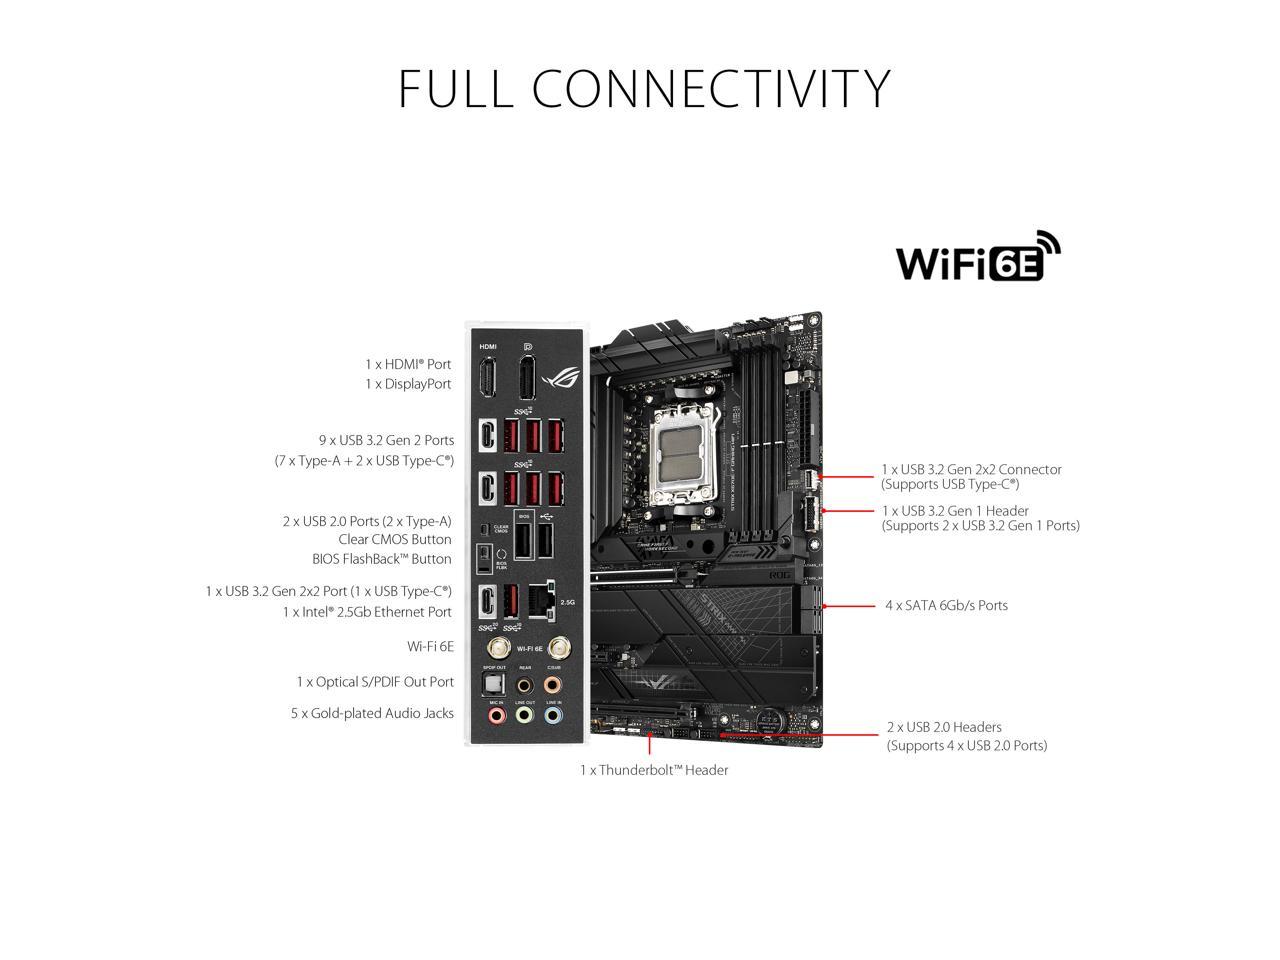 ASUS ROG STRIX X670E-F GAMING WIFI6E Socket AM5 (LGA 1718) Ryzen 7000 gaming motherboard(PCIe 5.0, DDR5,16 + 2 power stages,four M.2 slots with heatsinks,USB 3.2 Gen 2x2,AI Cooling II, and Aura Sync)